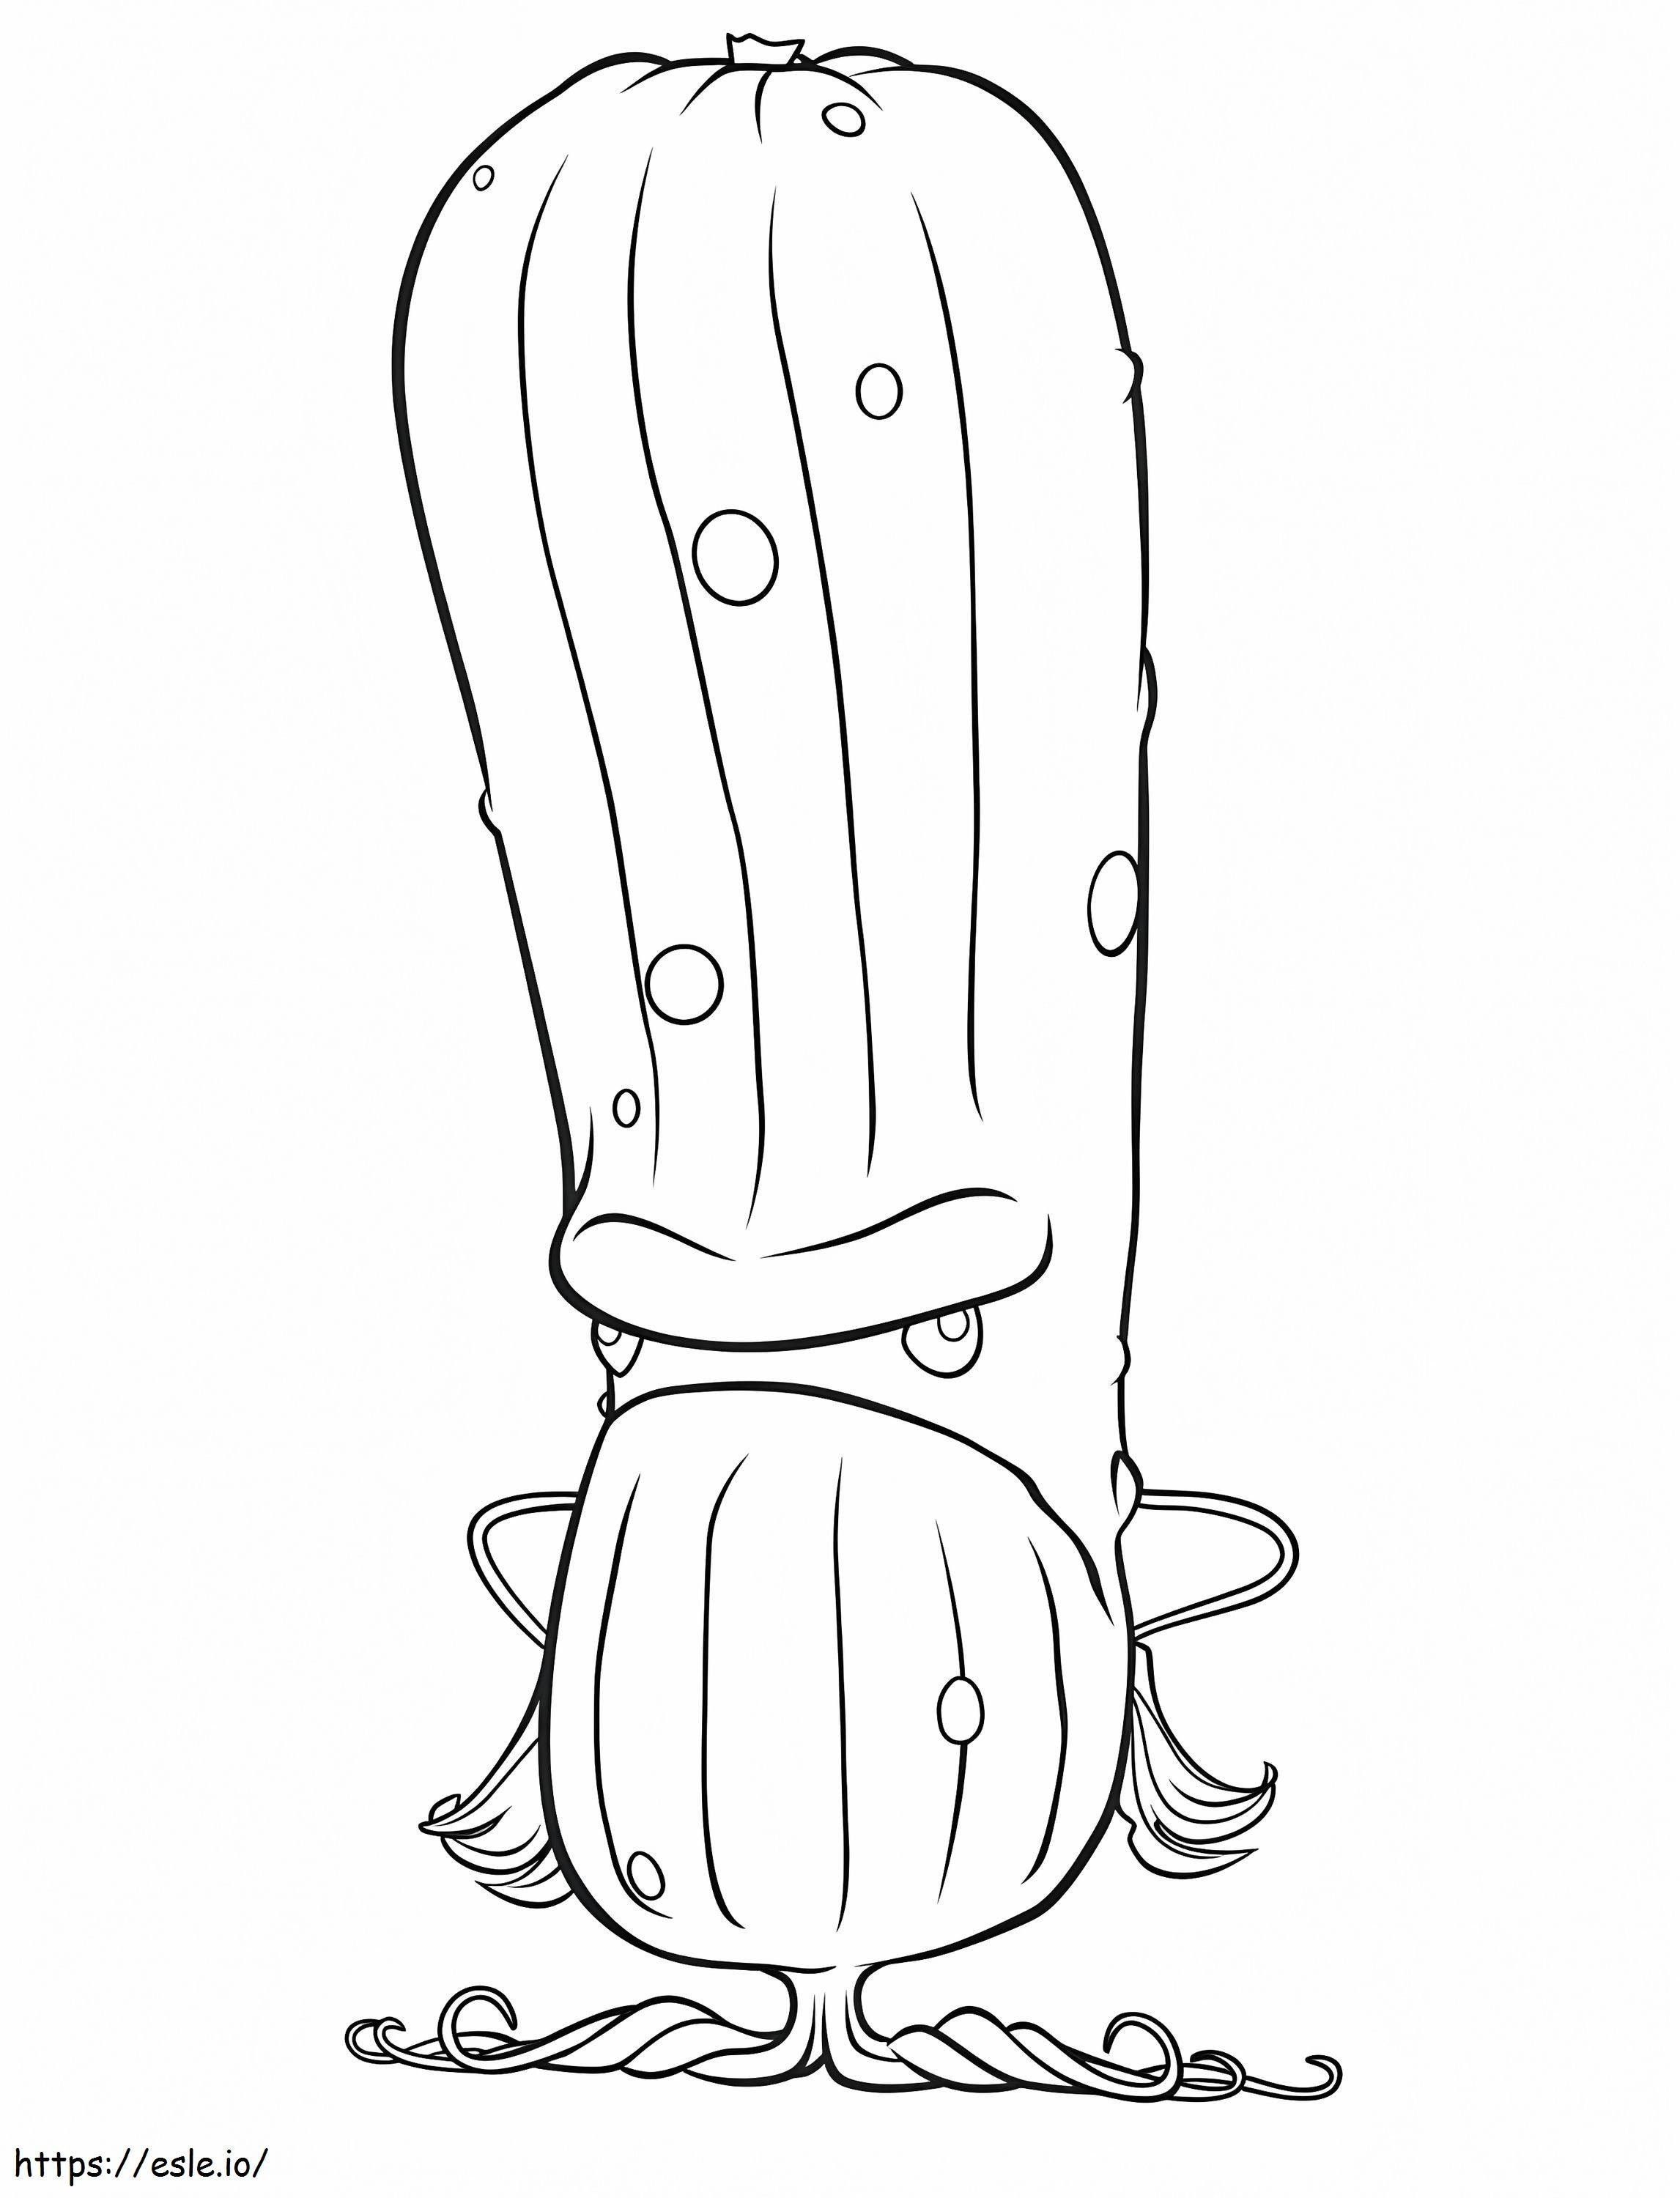 Sour The Pickle coloring page